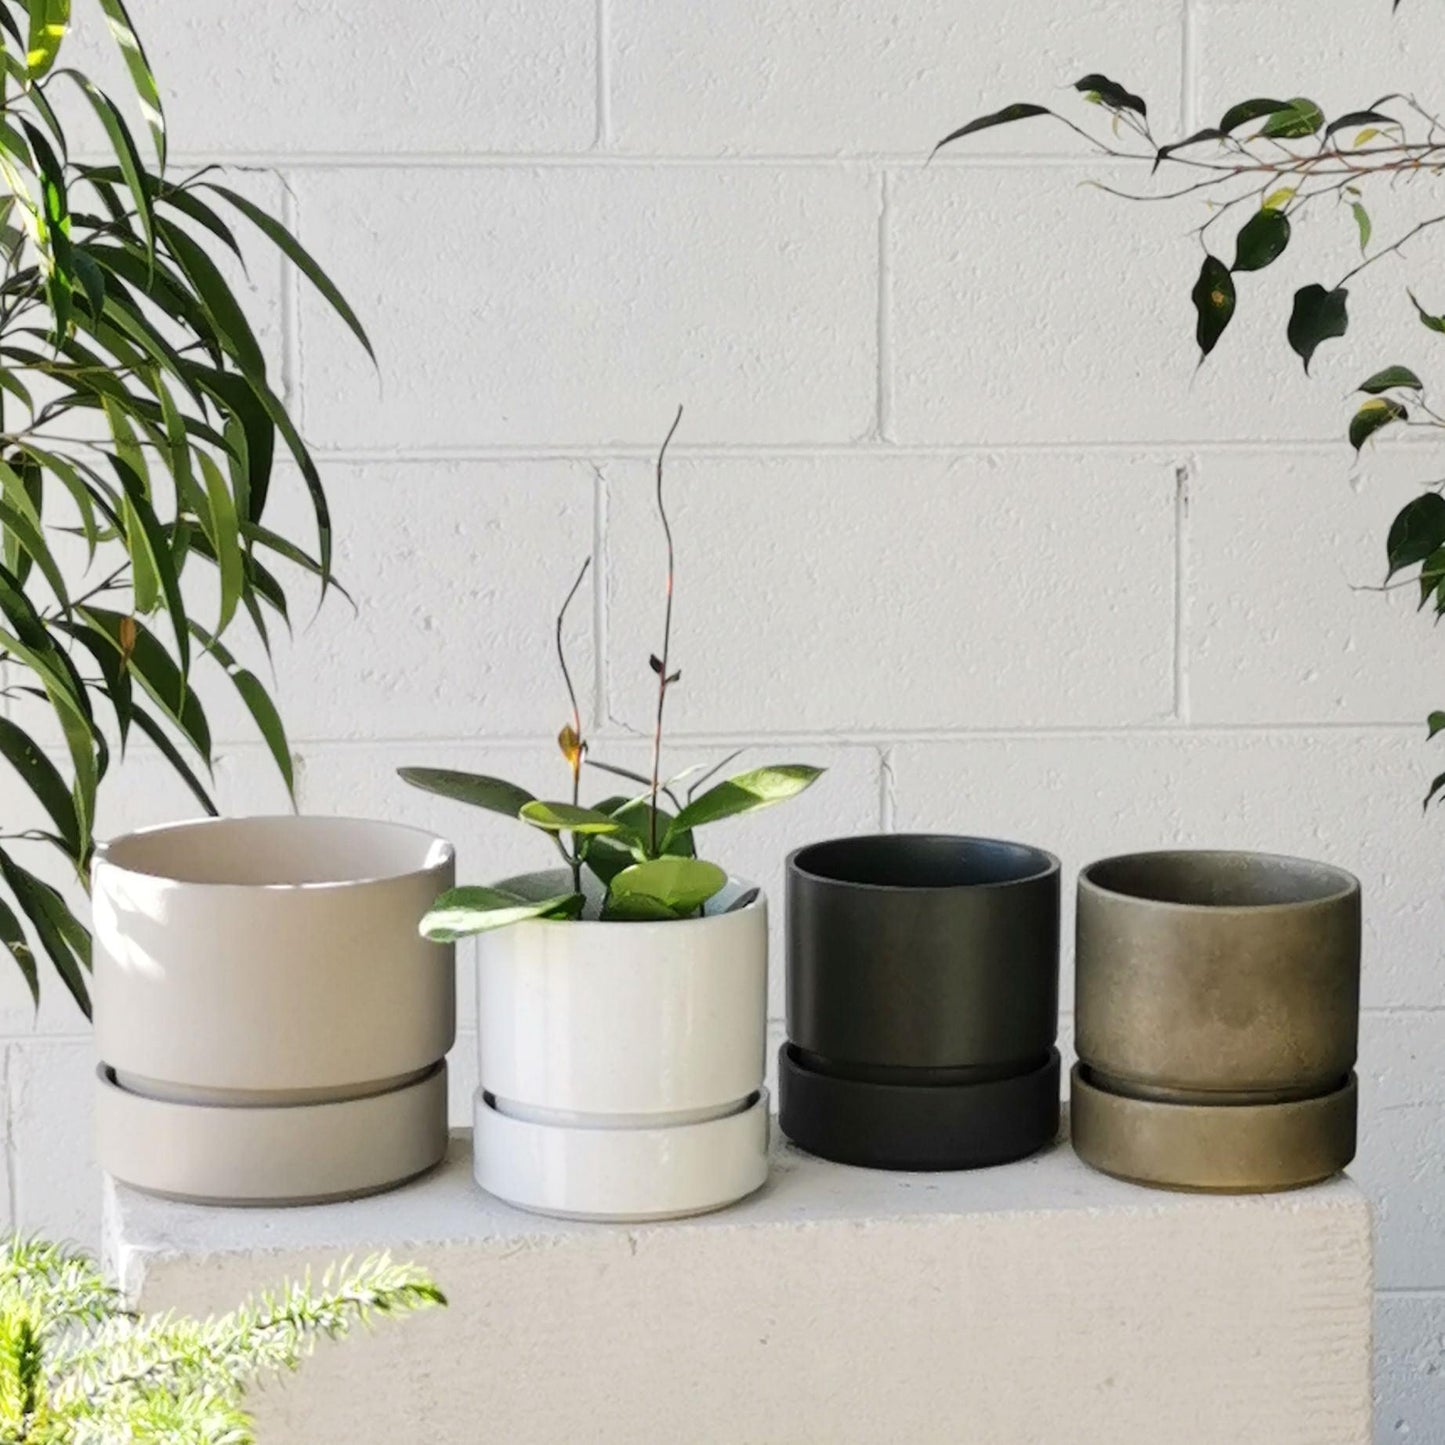 Cora Planter by The Plant Society in Quartz - Gloss - THE PLANT SOCIETY